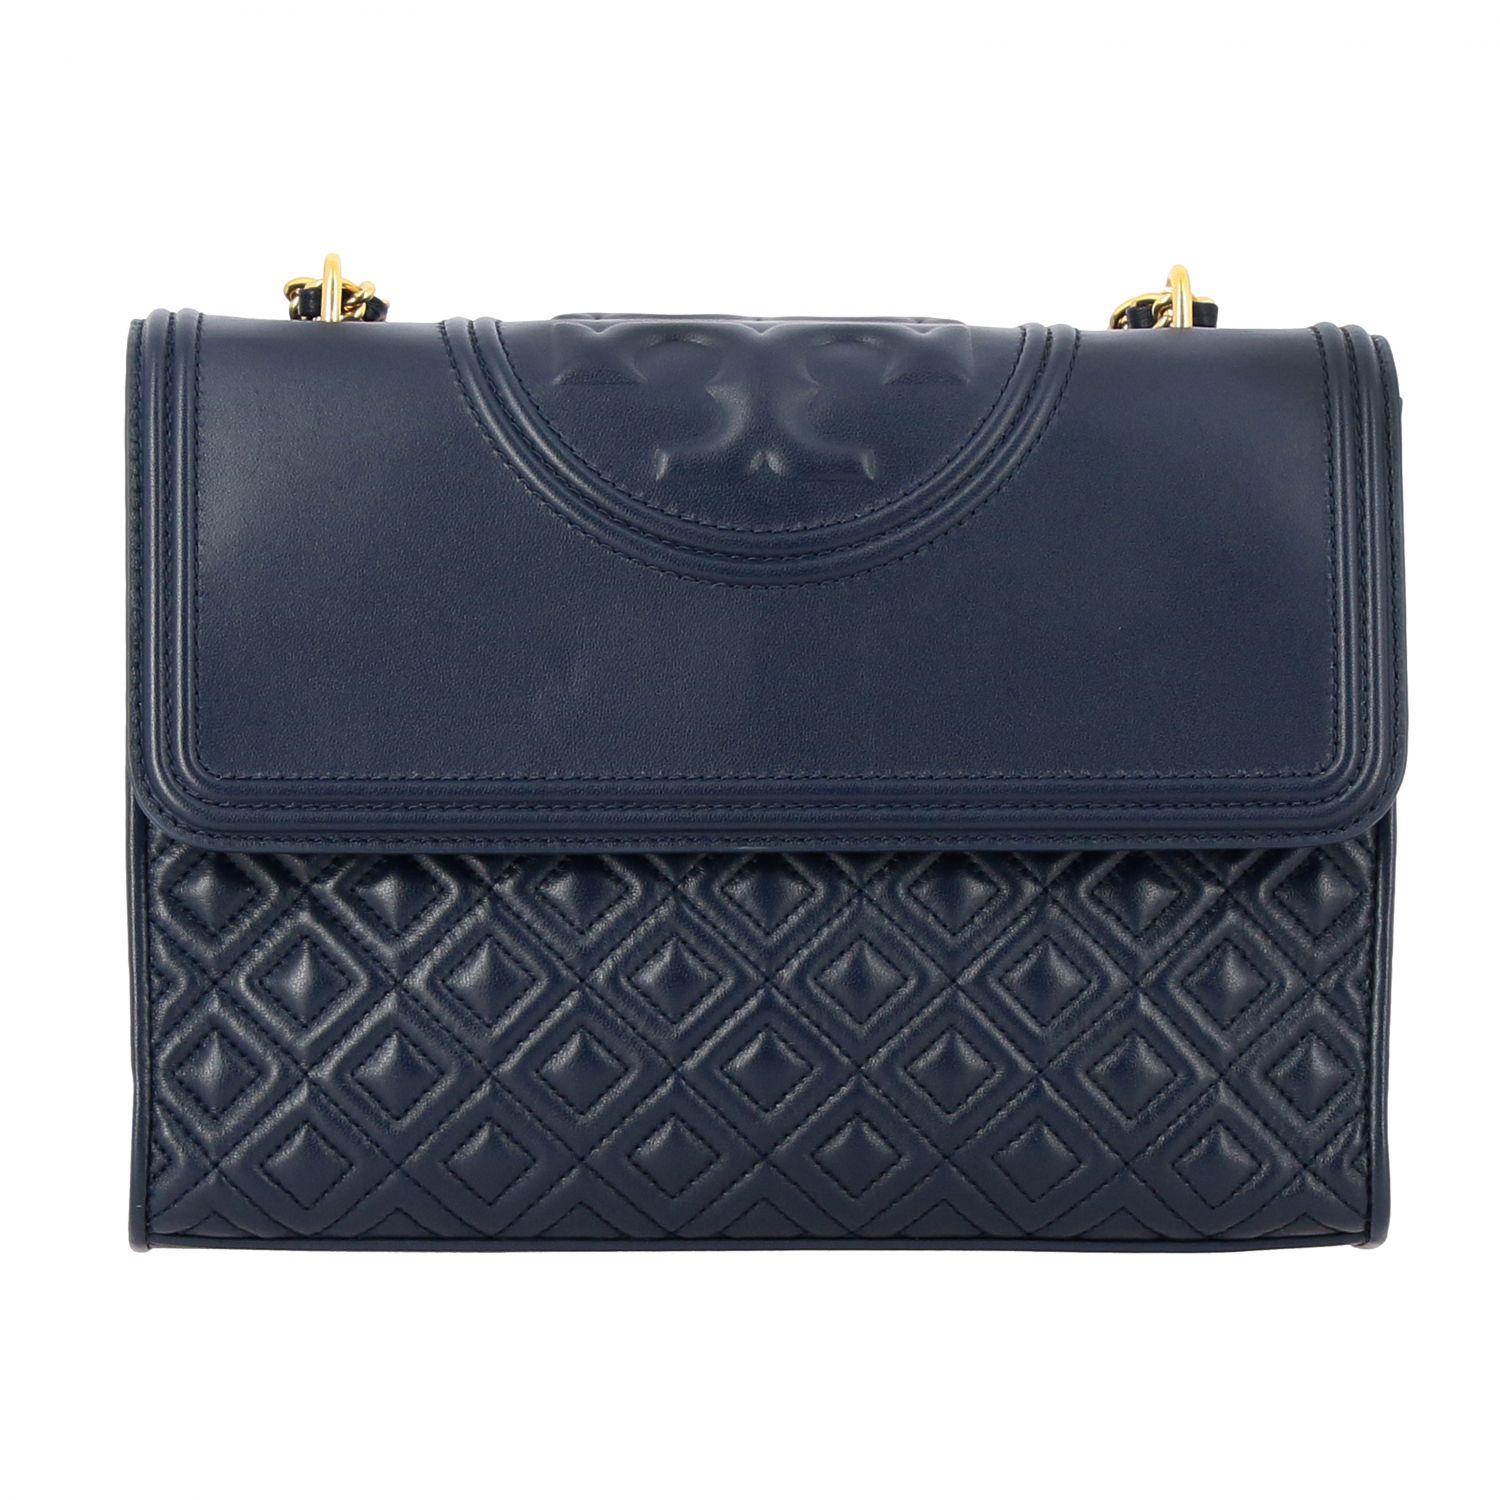 Tory Burch Outlet: mini bag for woman - Blue | Tory Burch mini bag 43833  online on 